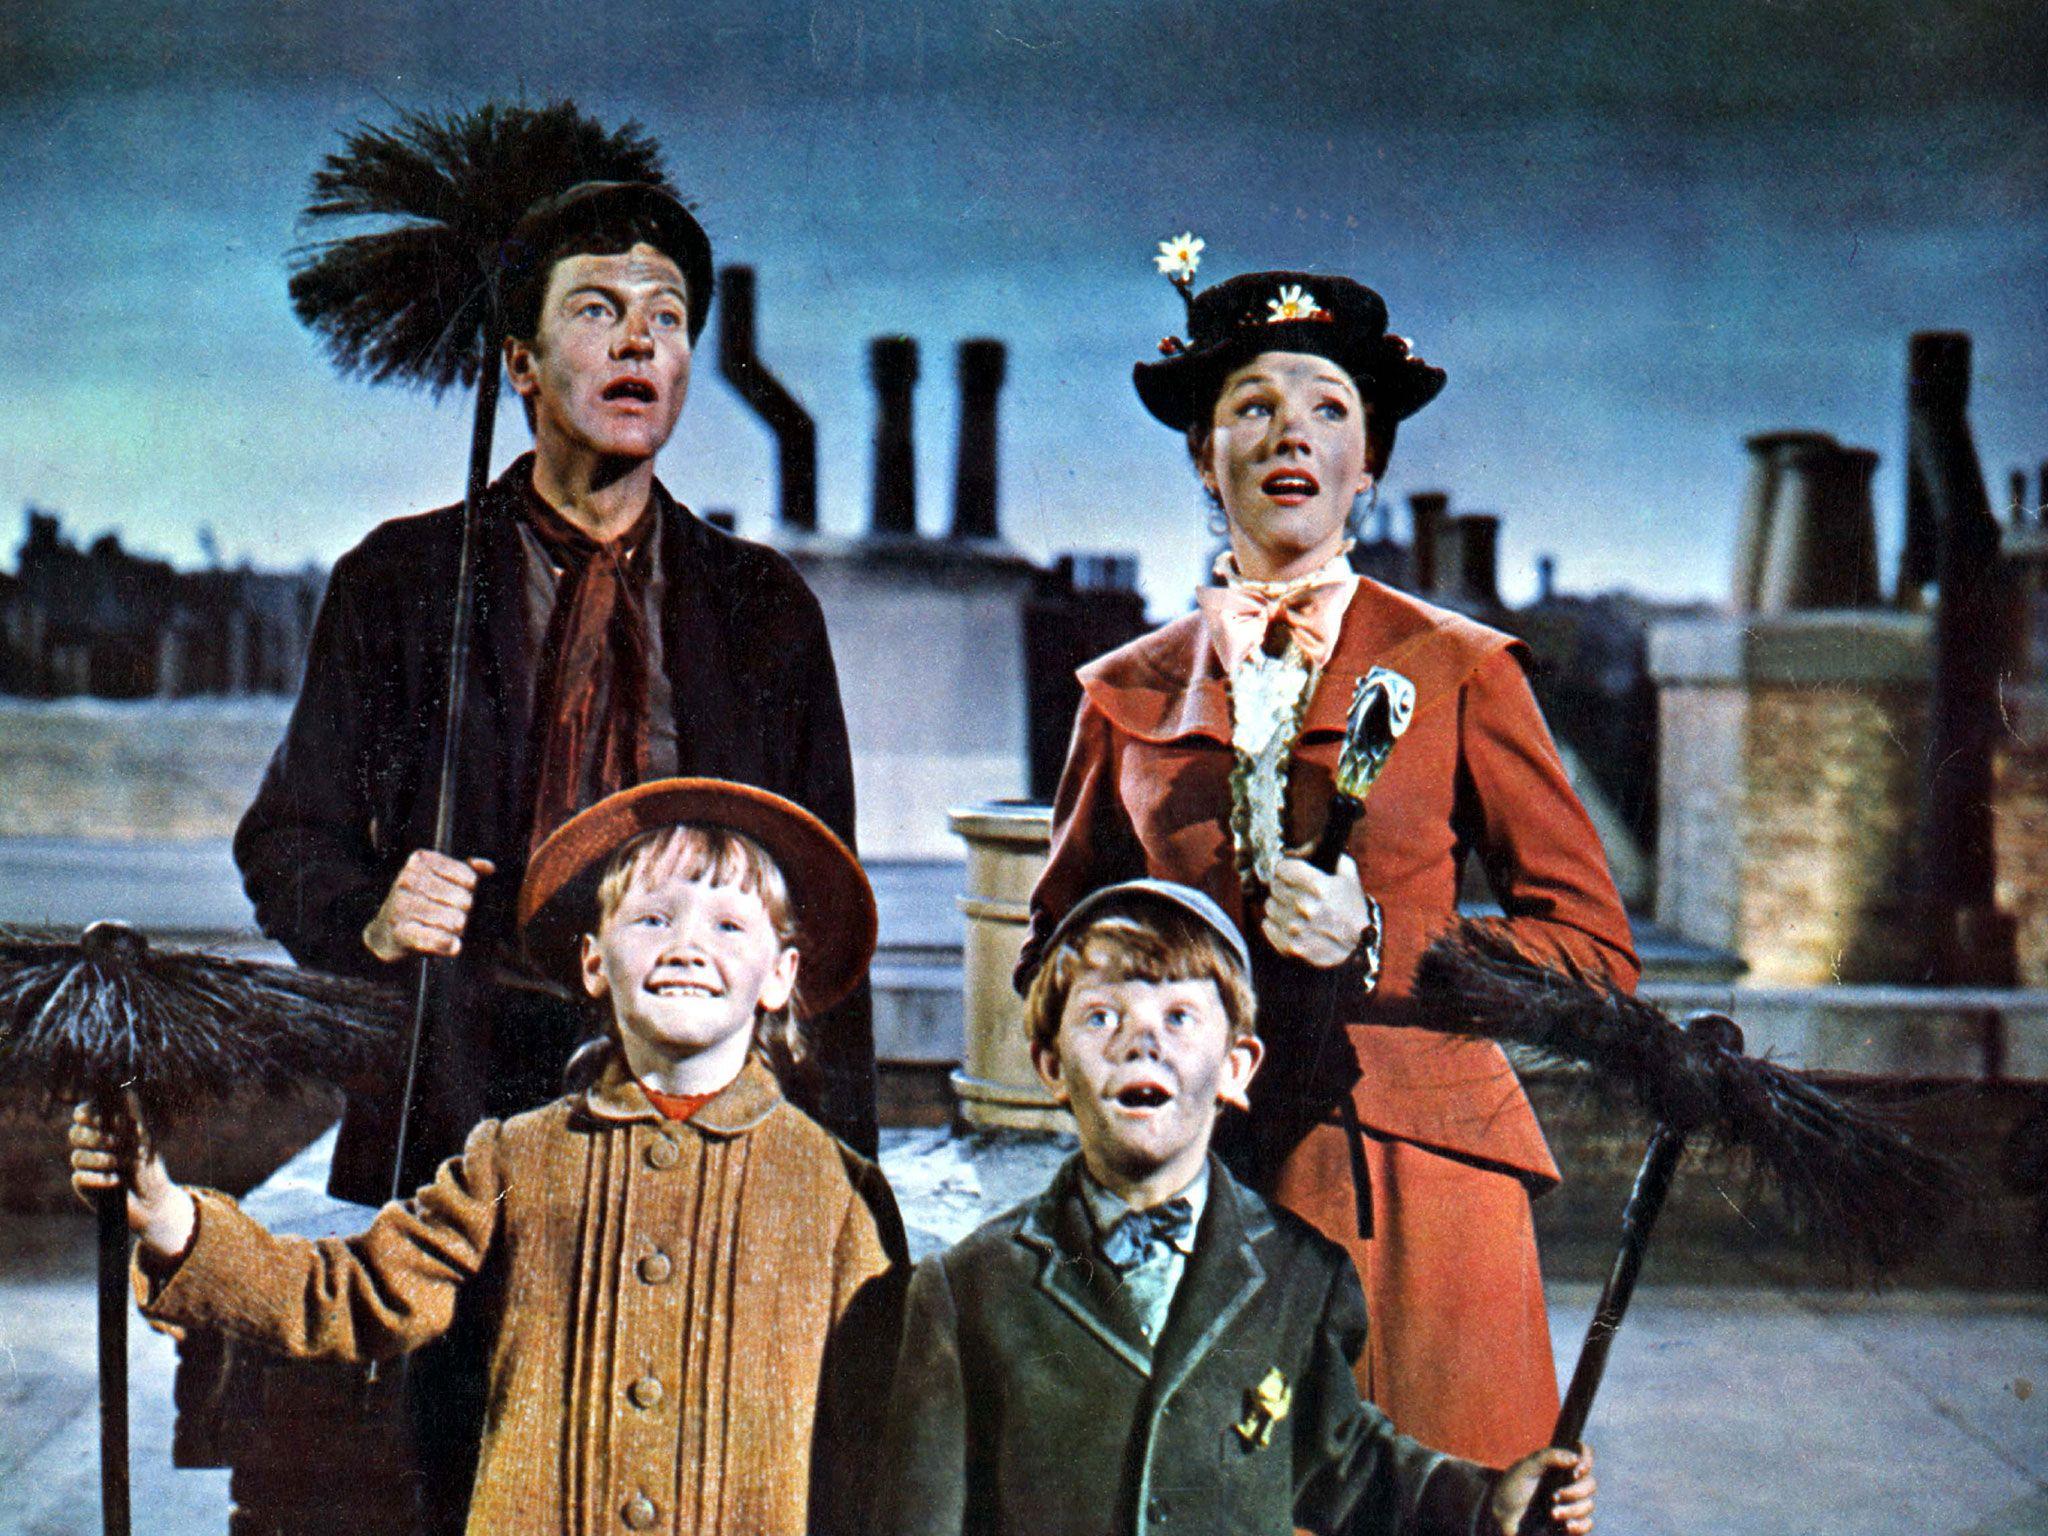 Meryl Streep in talks to join the cast of Mary Poppins sequel